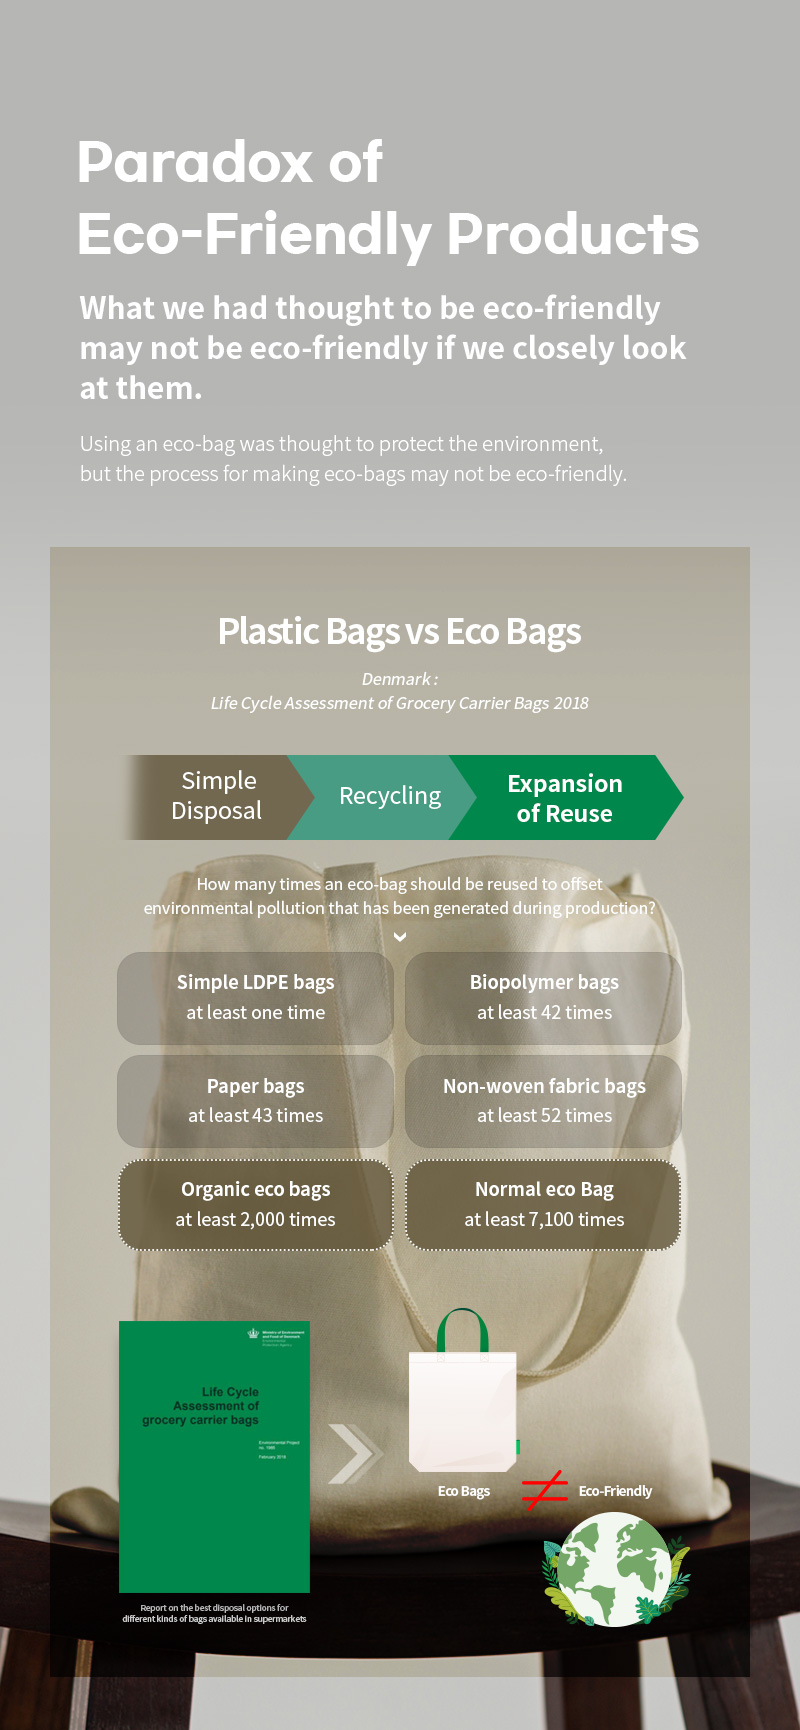 Plastic Bags vs Eco Bags Simple Disposal > Recycling > Expansion of Reuse